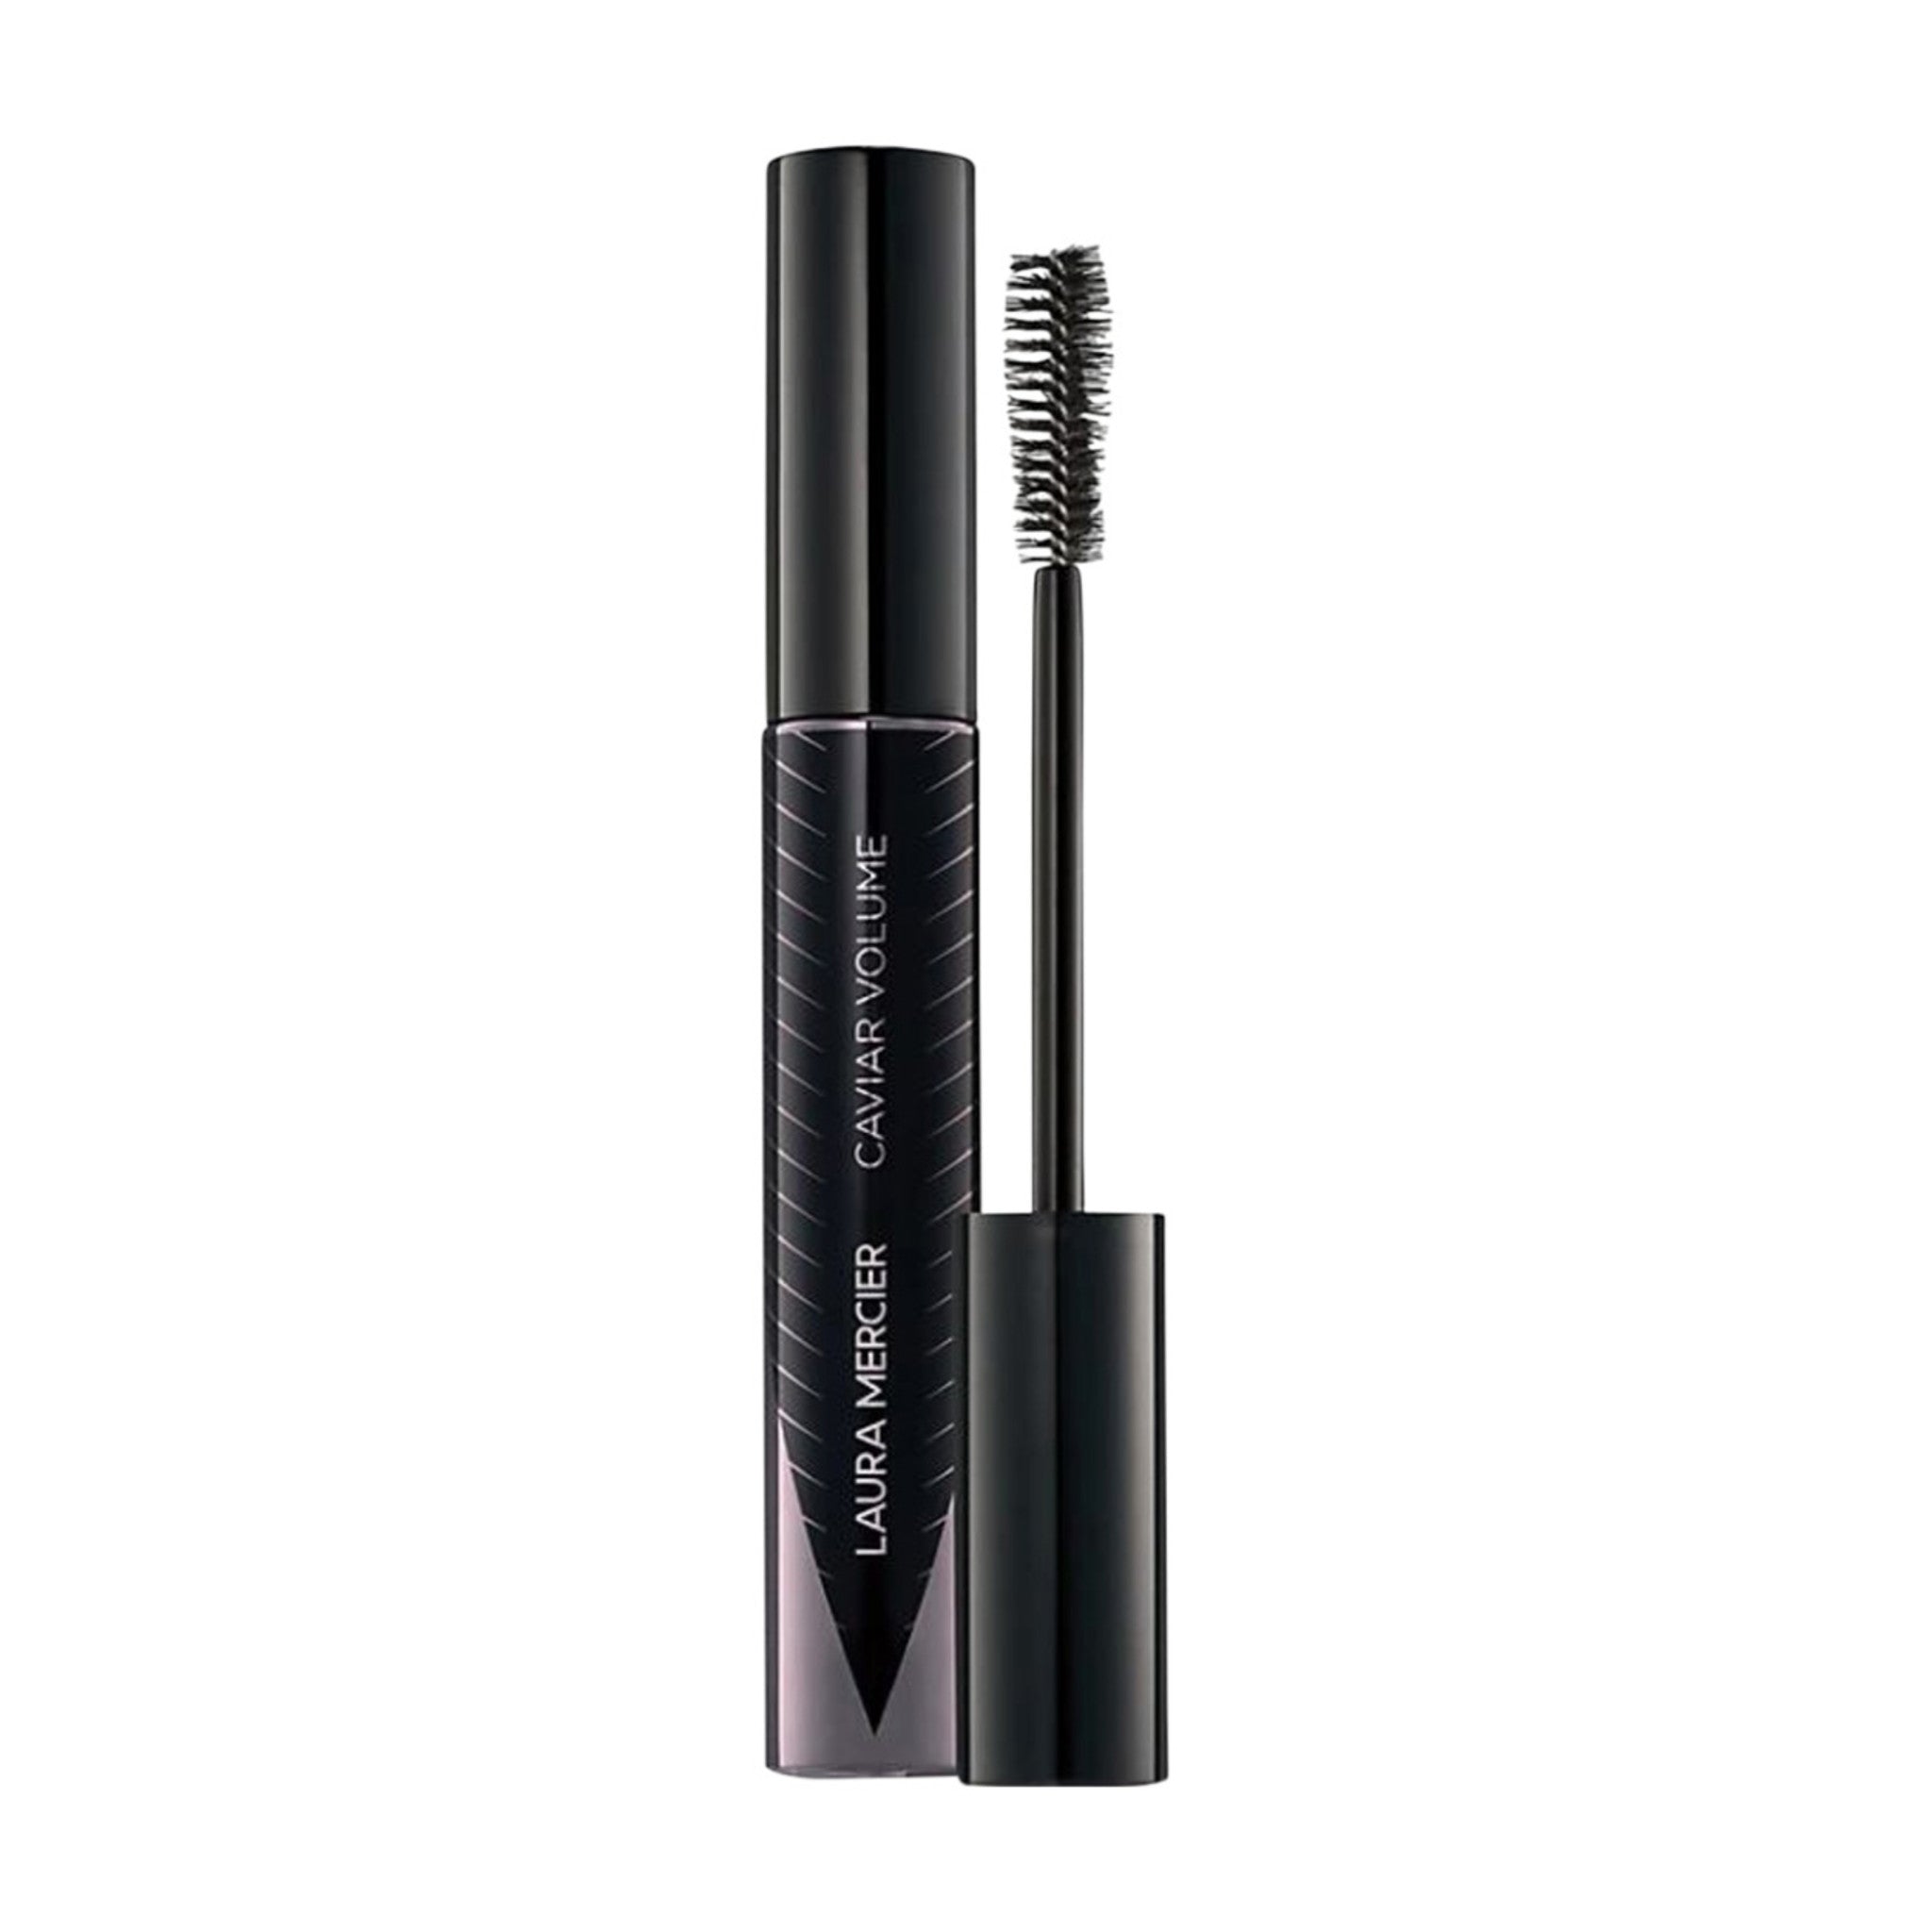 Laura Mercier Caviar Volume Panoramic Mascara main image. This product is in the color black